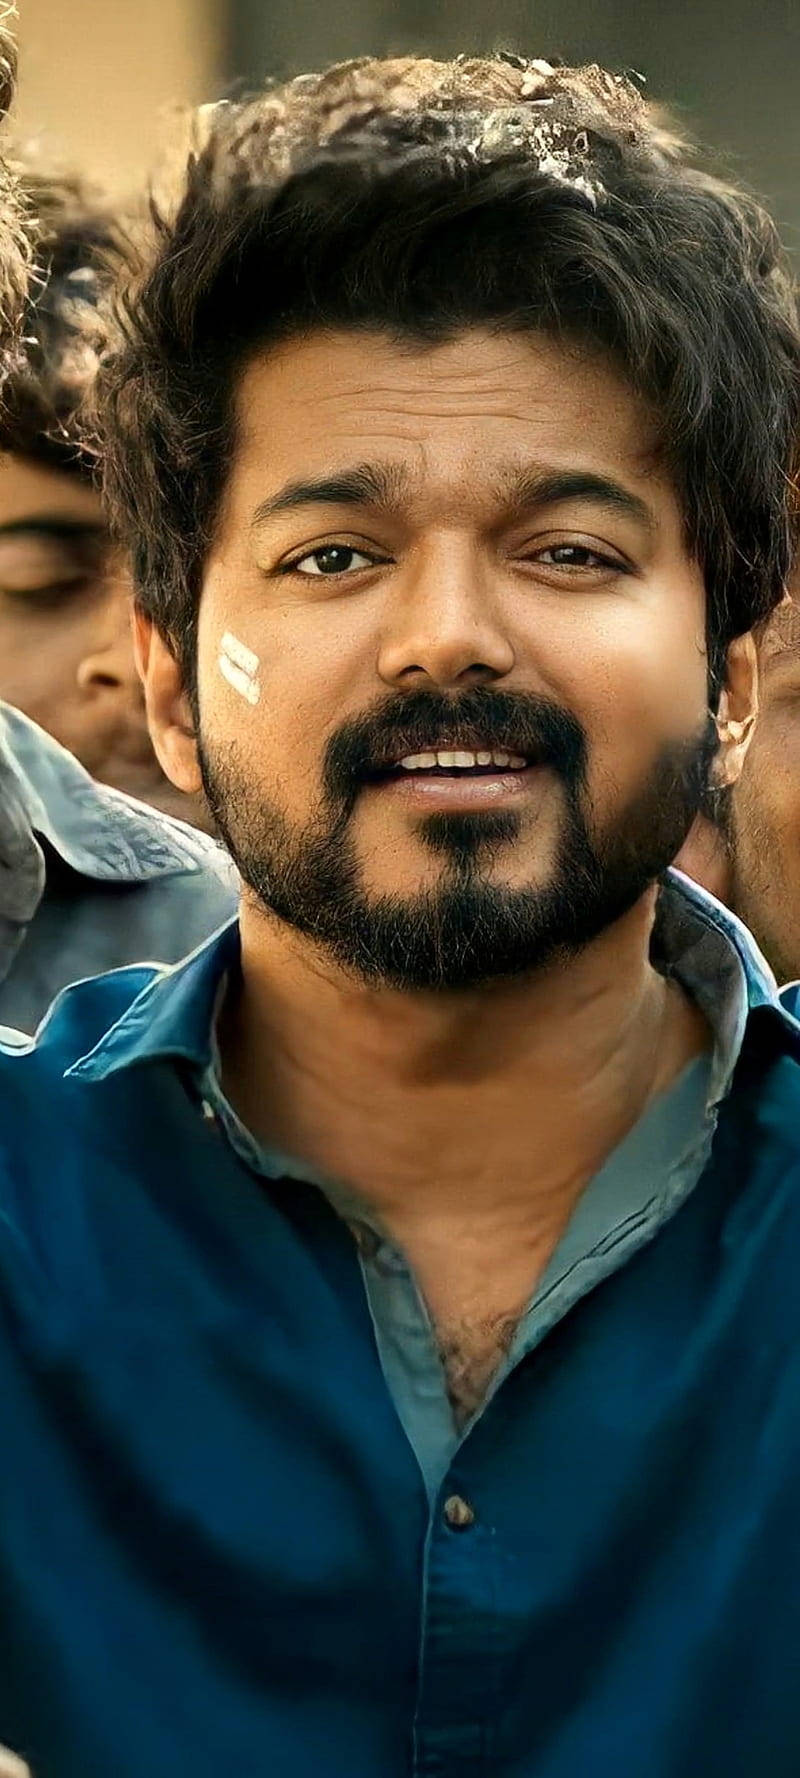 Master Vijay With Wounded Face Background